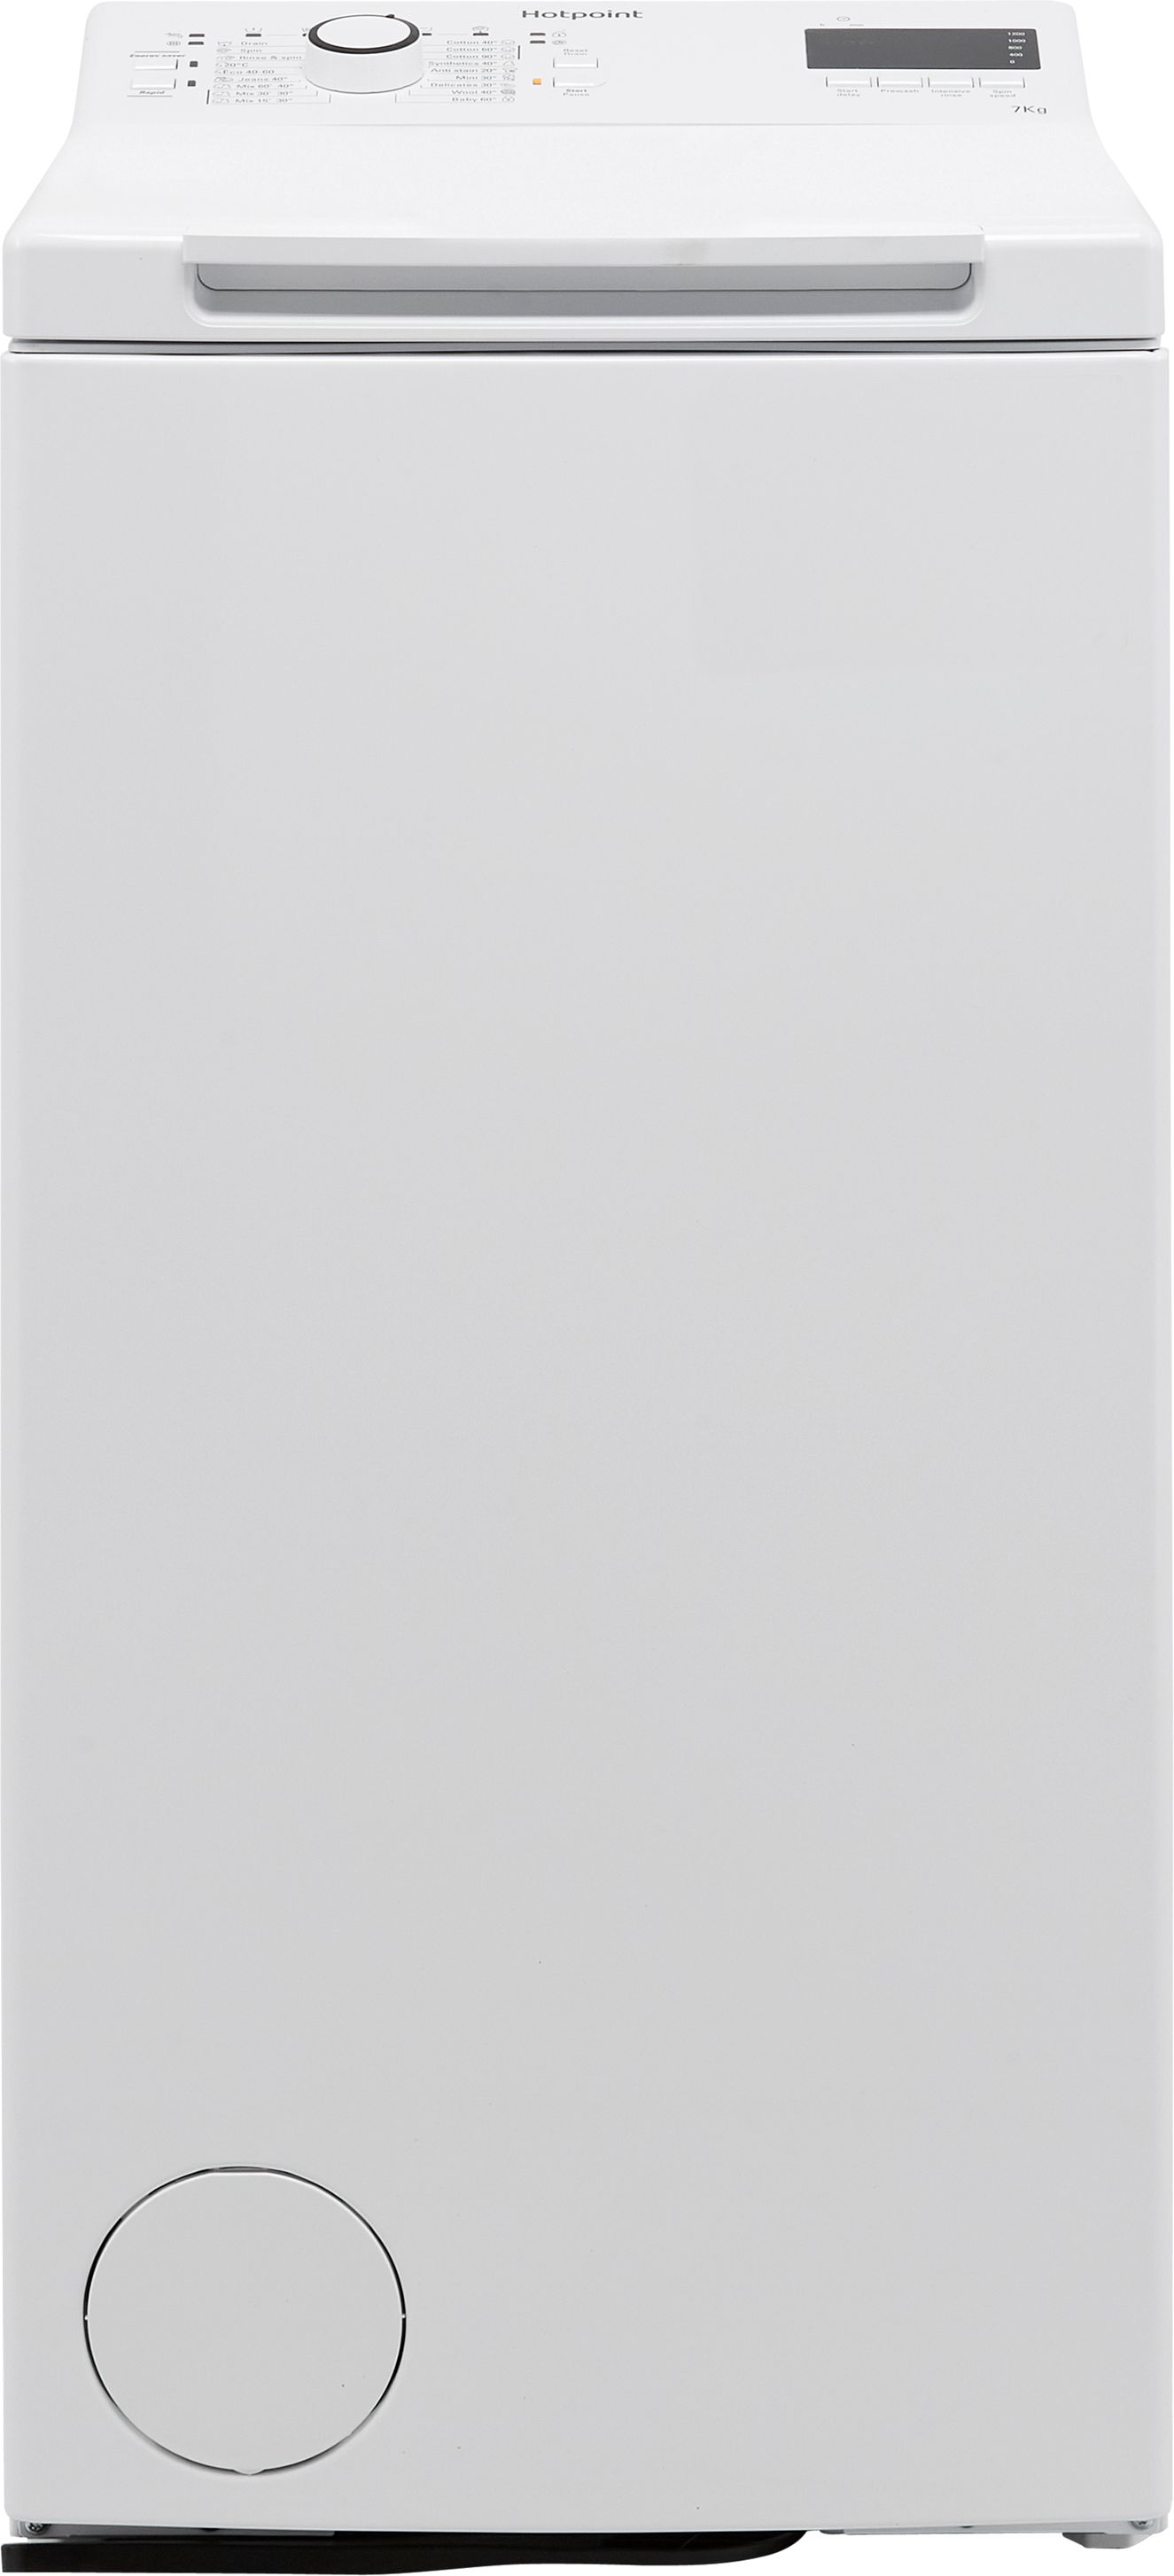 Hotpoint WMTF722UUKN 7kg Washing Machine with 1200 rpm - White - E Rated White